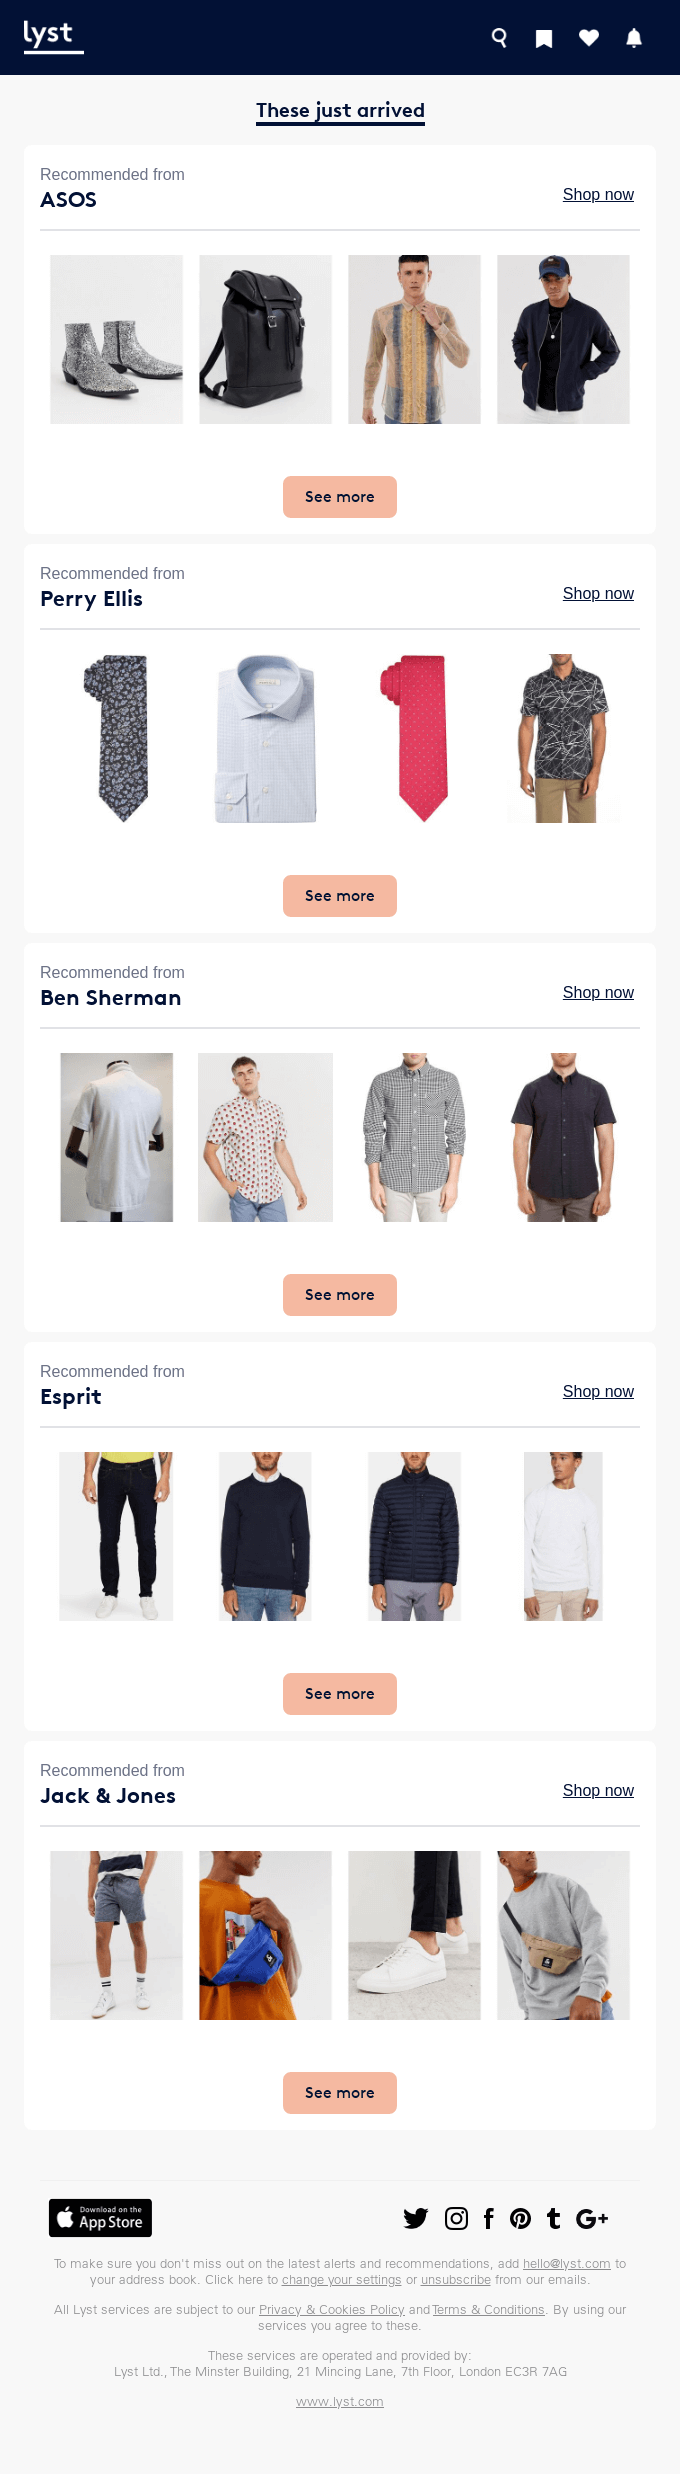 Personalized email design from Lyst